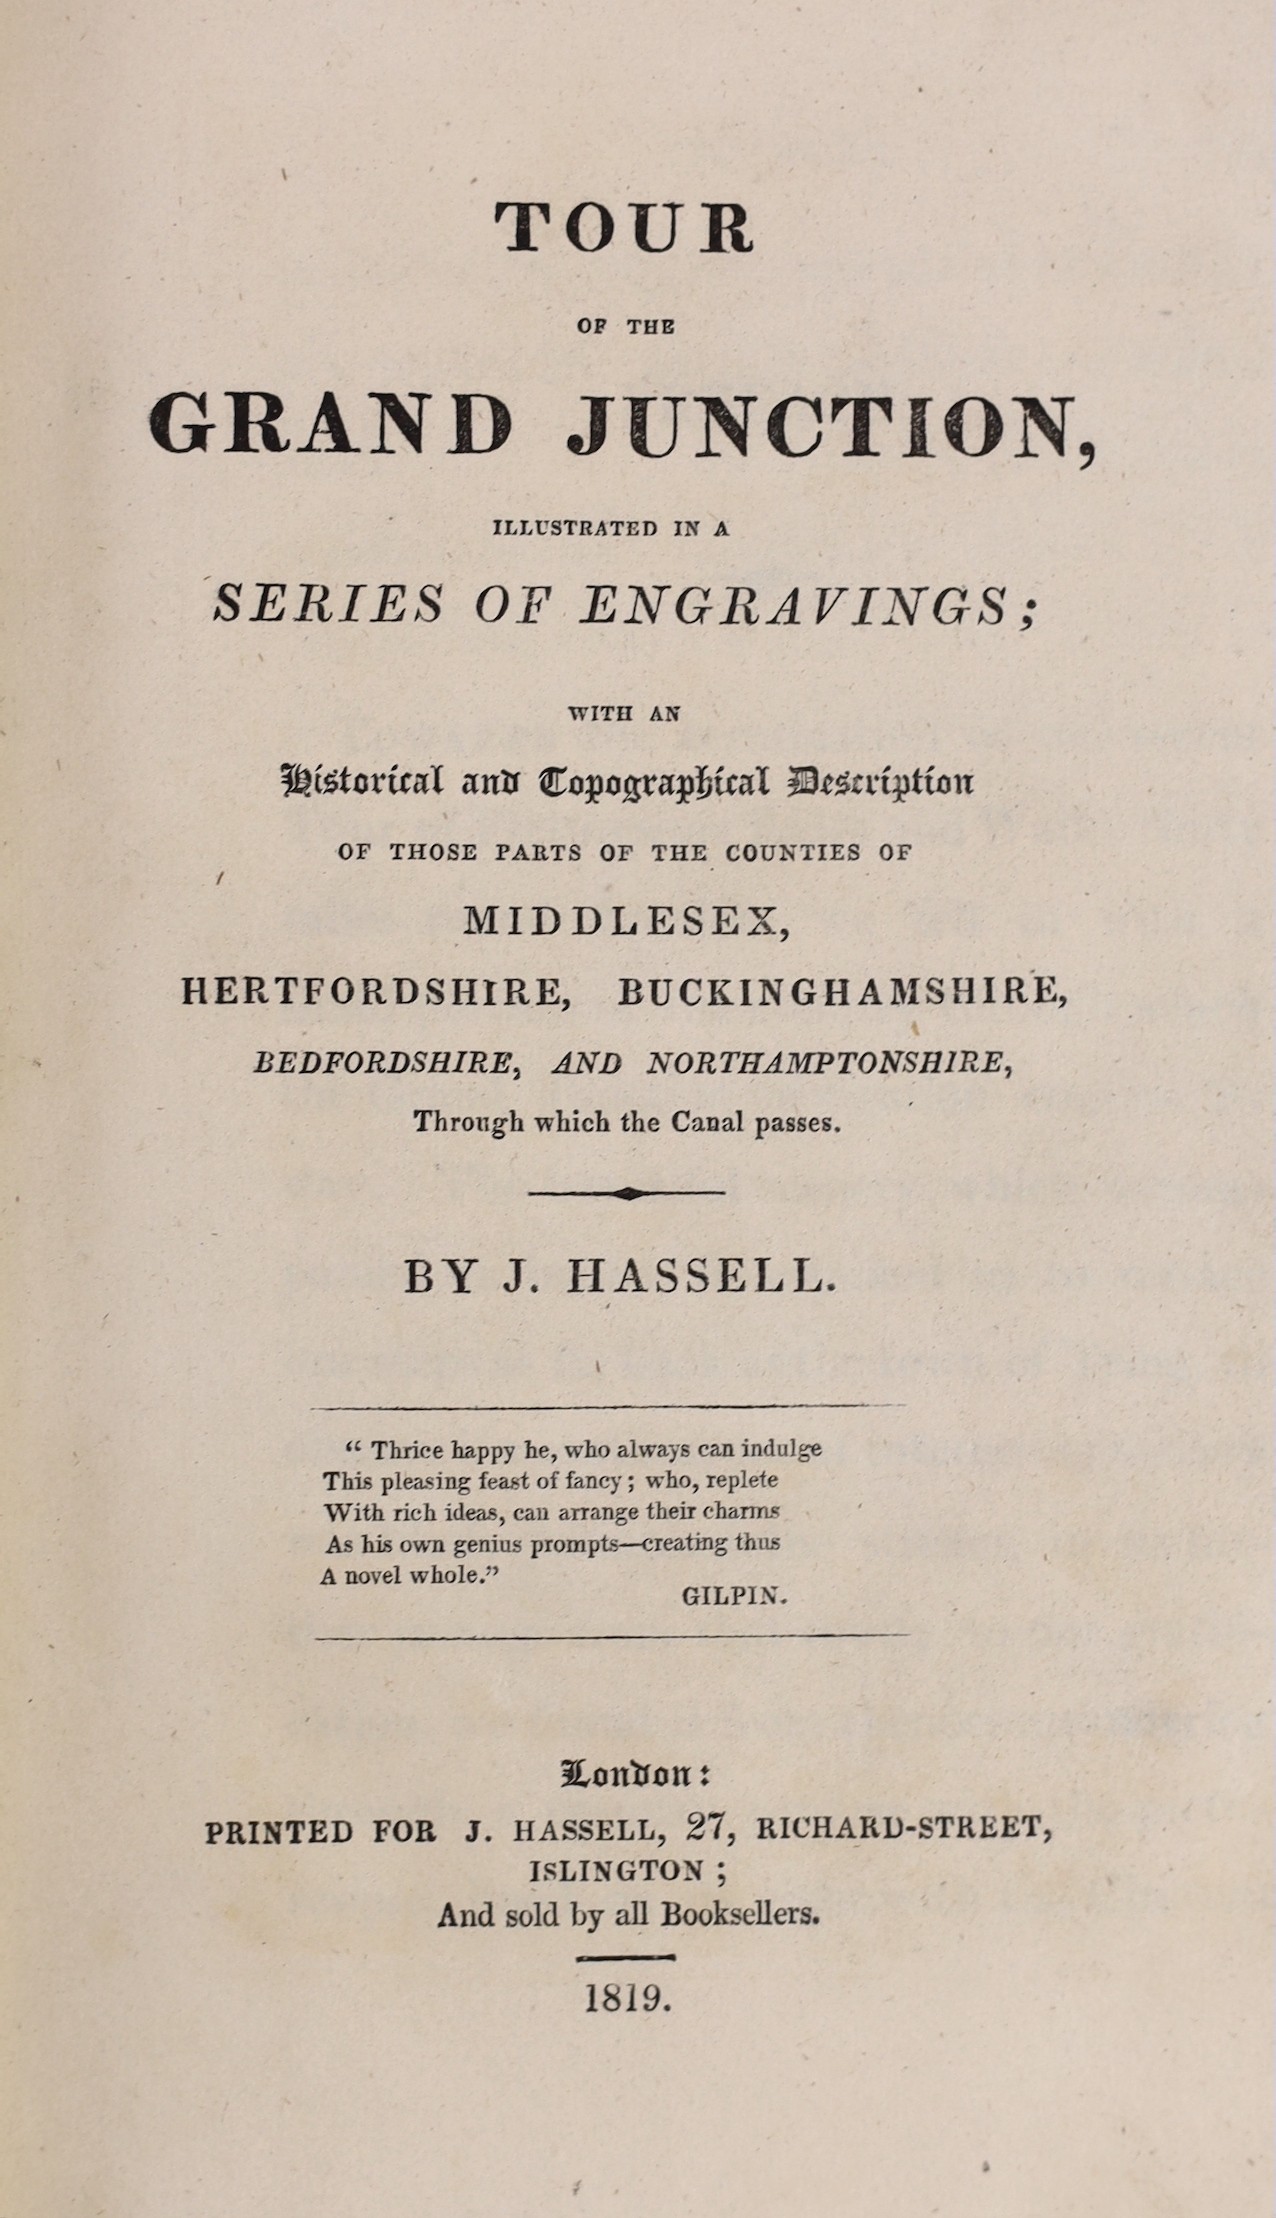 Hassell, James - Tour of the Grand Junction, 8vo, later half red morocco, with 24 uncoloured lithographs, London, 1819